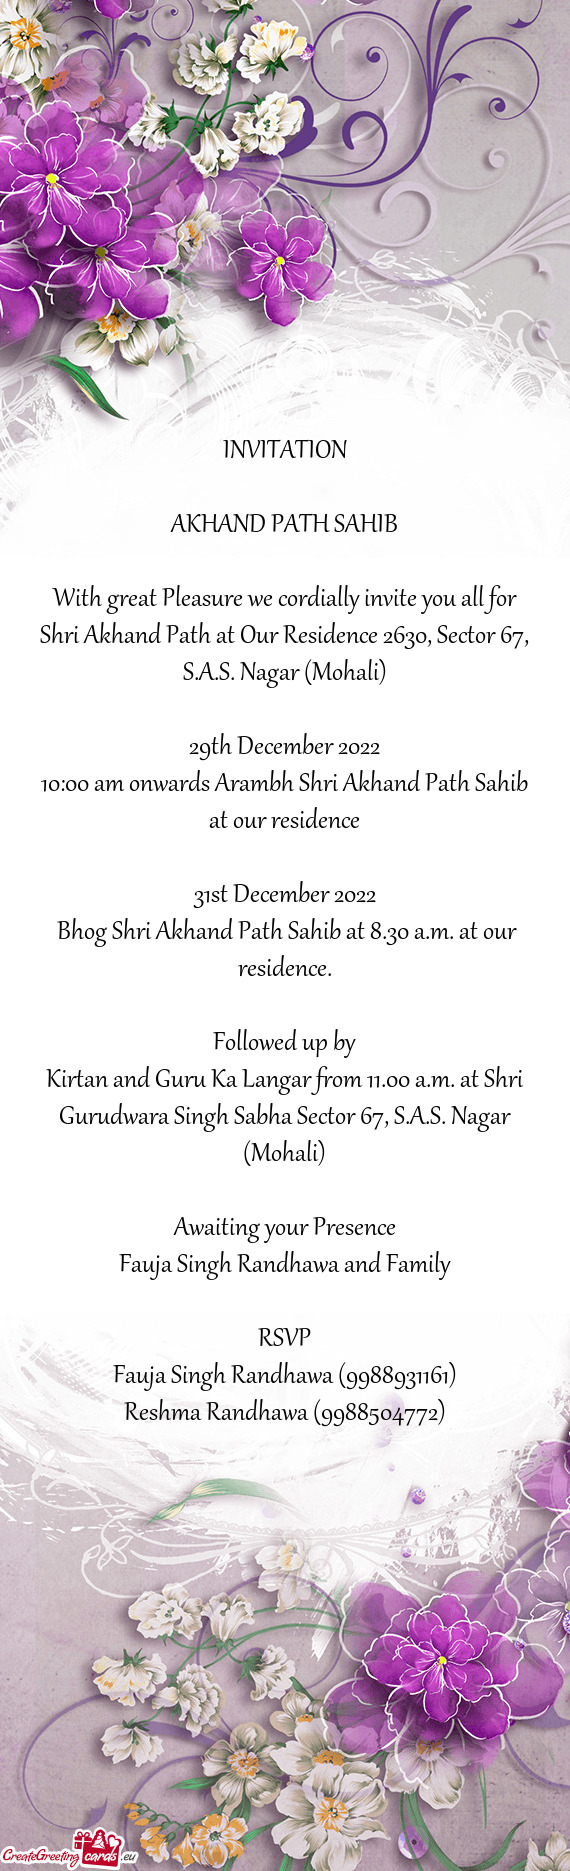 With great Pleasure we cordially invite you all for Shri Akhand Path at Our Residence 2630, Sector 6